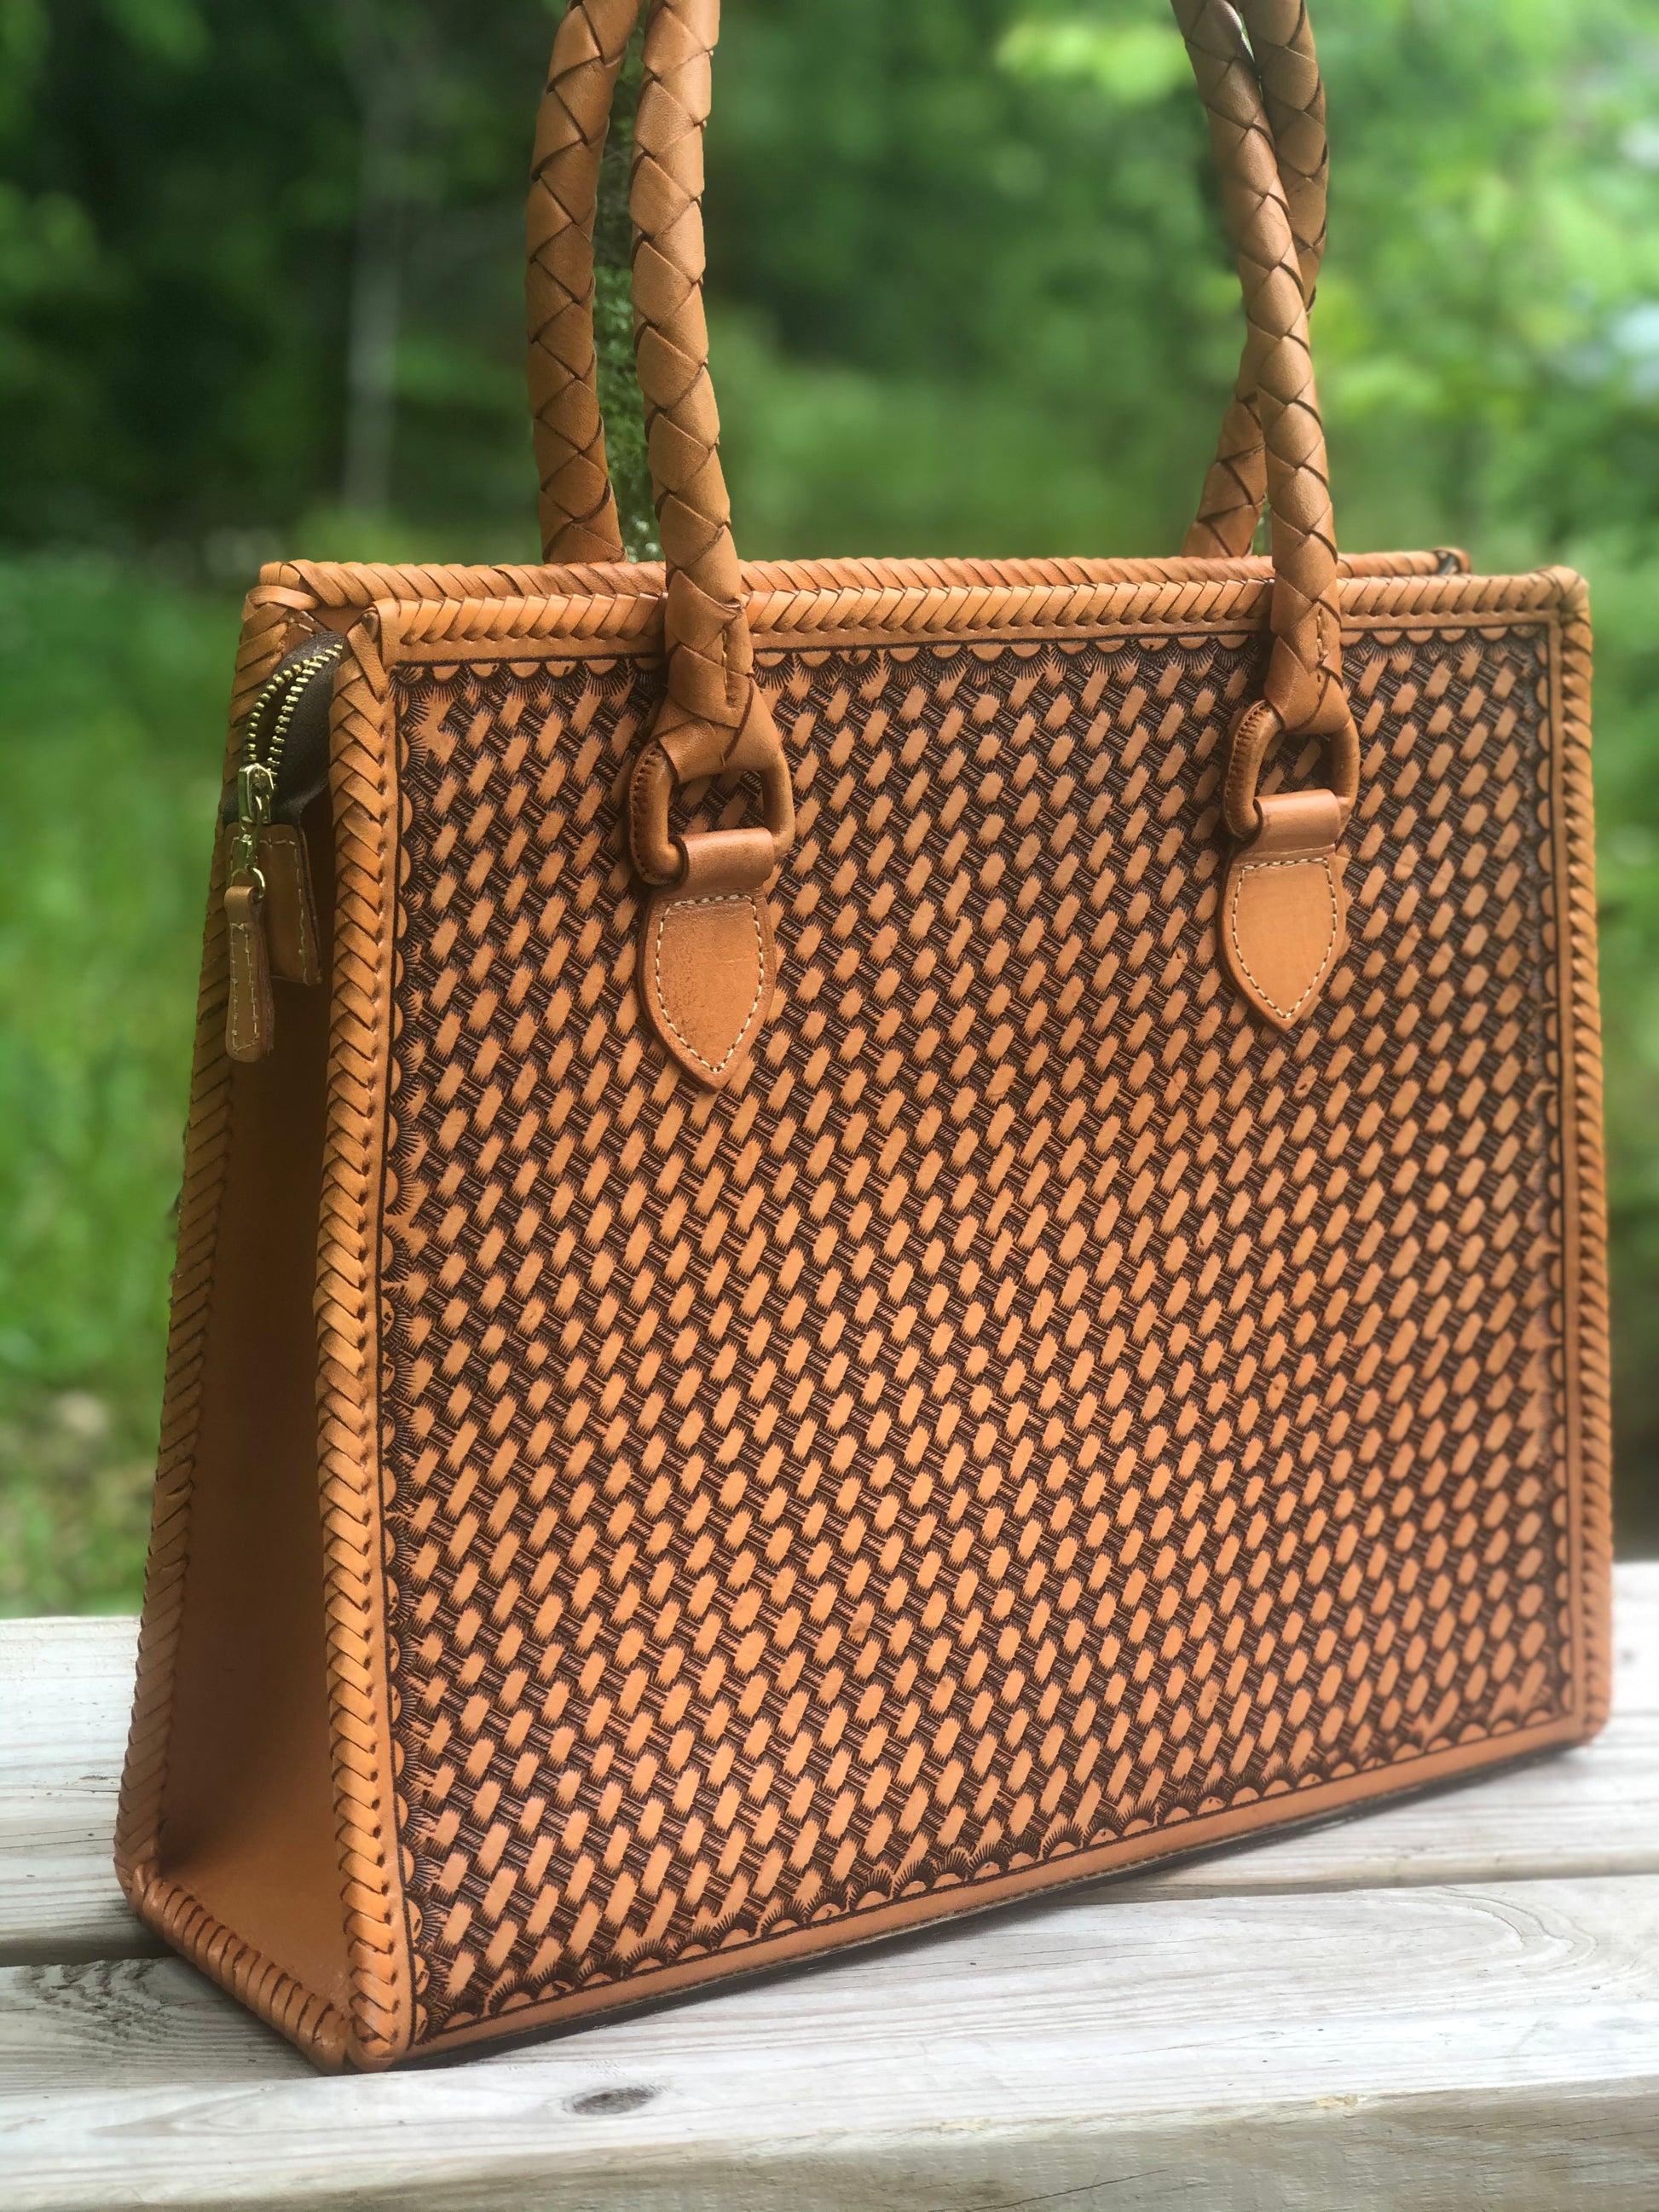 Hand Tooled Leather Large Tote, "MARCUS" by ALLE - ALLE Handbags